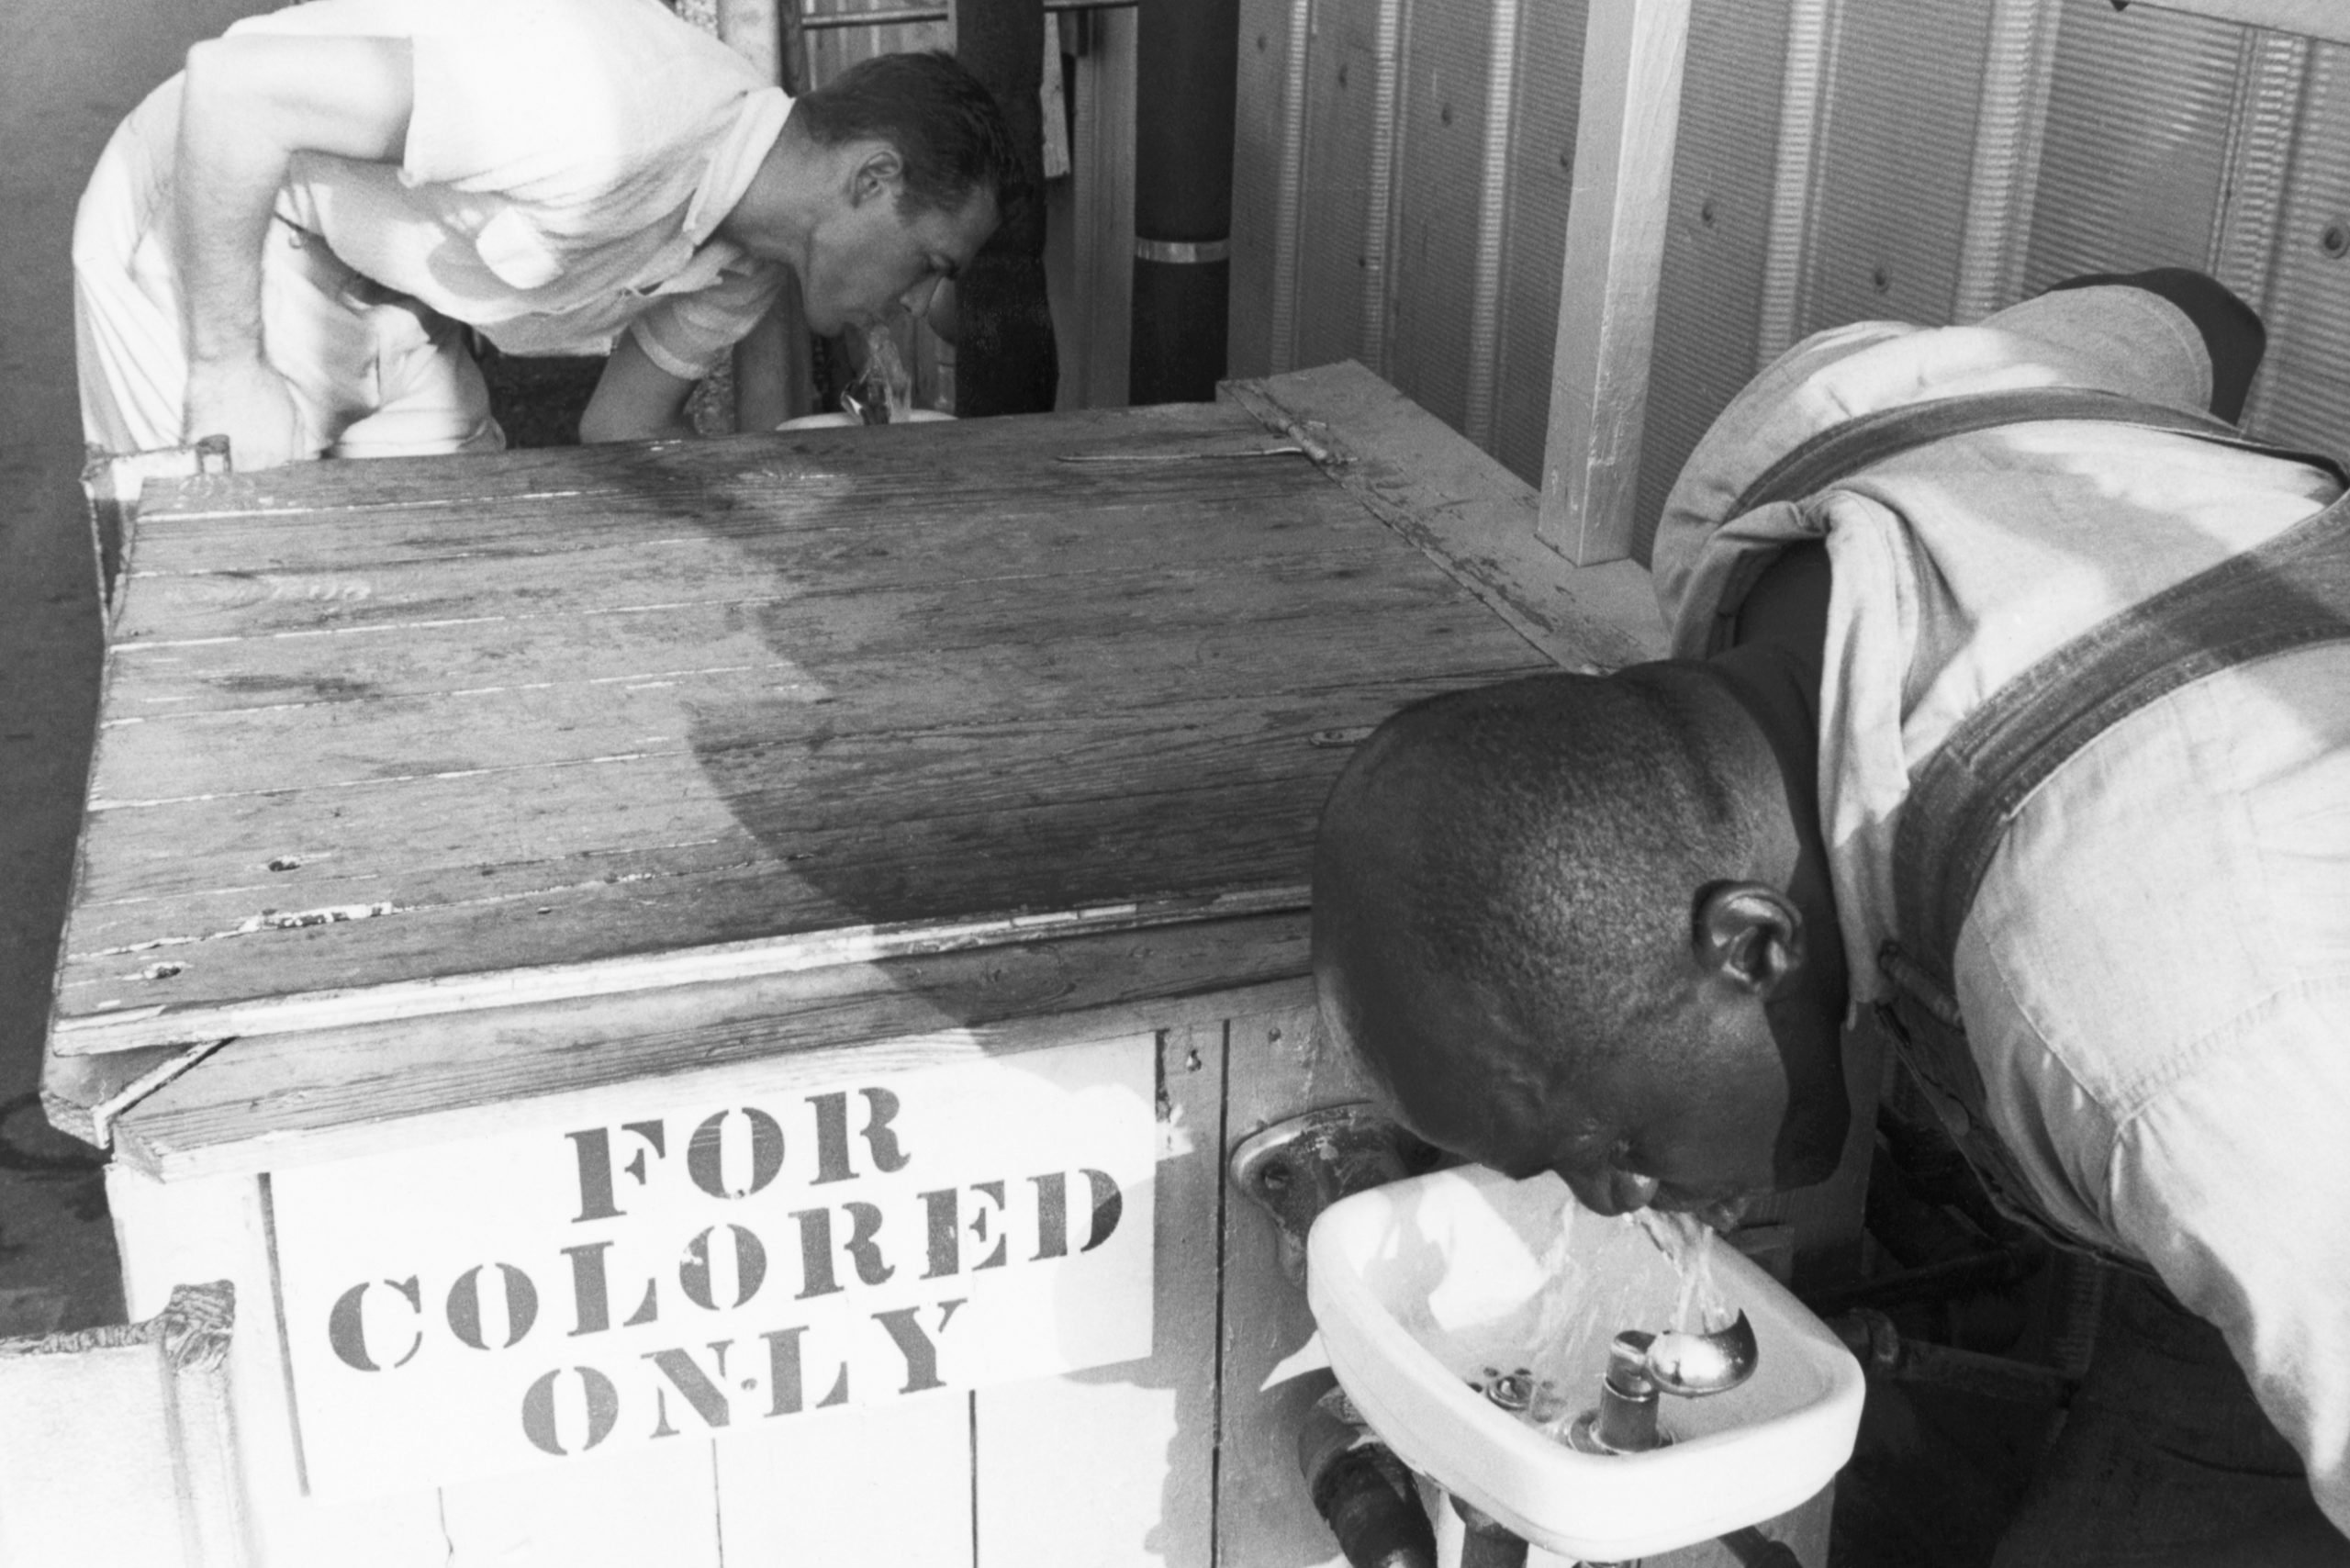 Men Drinking from Segregated Water Fountains